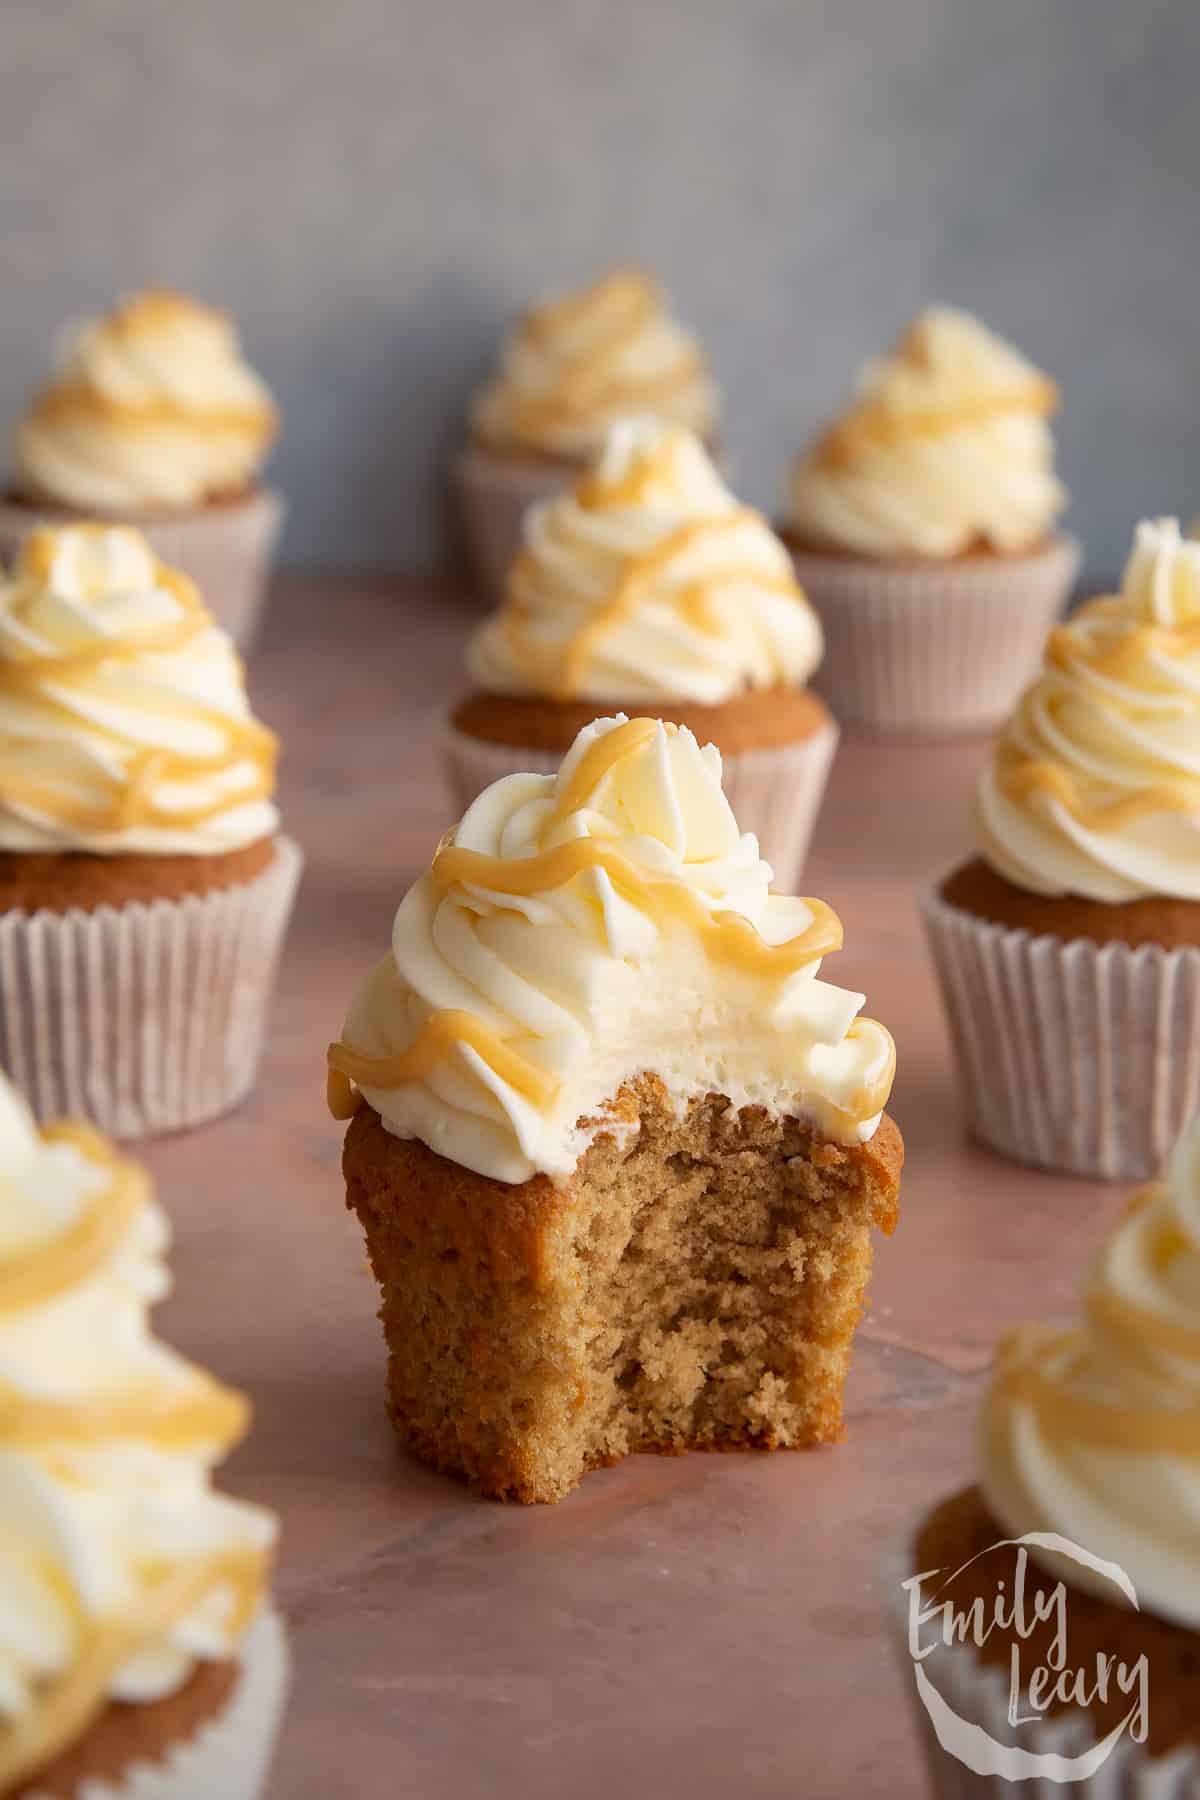 a Caramel latte cupcake with a bite missing from the side surrounded by more cupcakes.